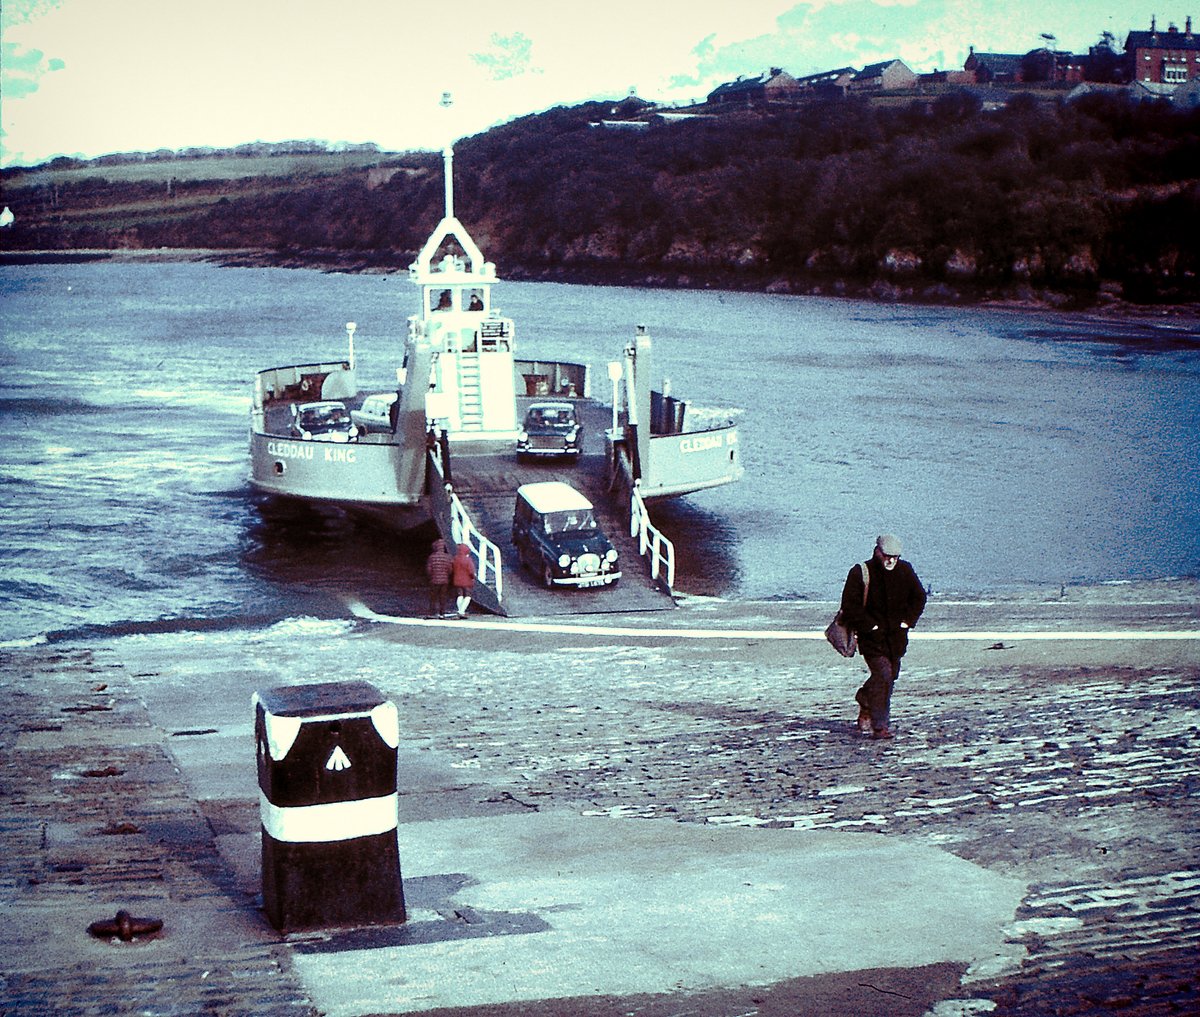 How many of you remember the days of the Pembroke Dock ferry...or even 'Wonderloaf' for that matter!